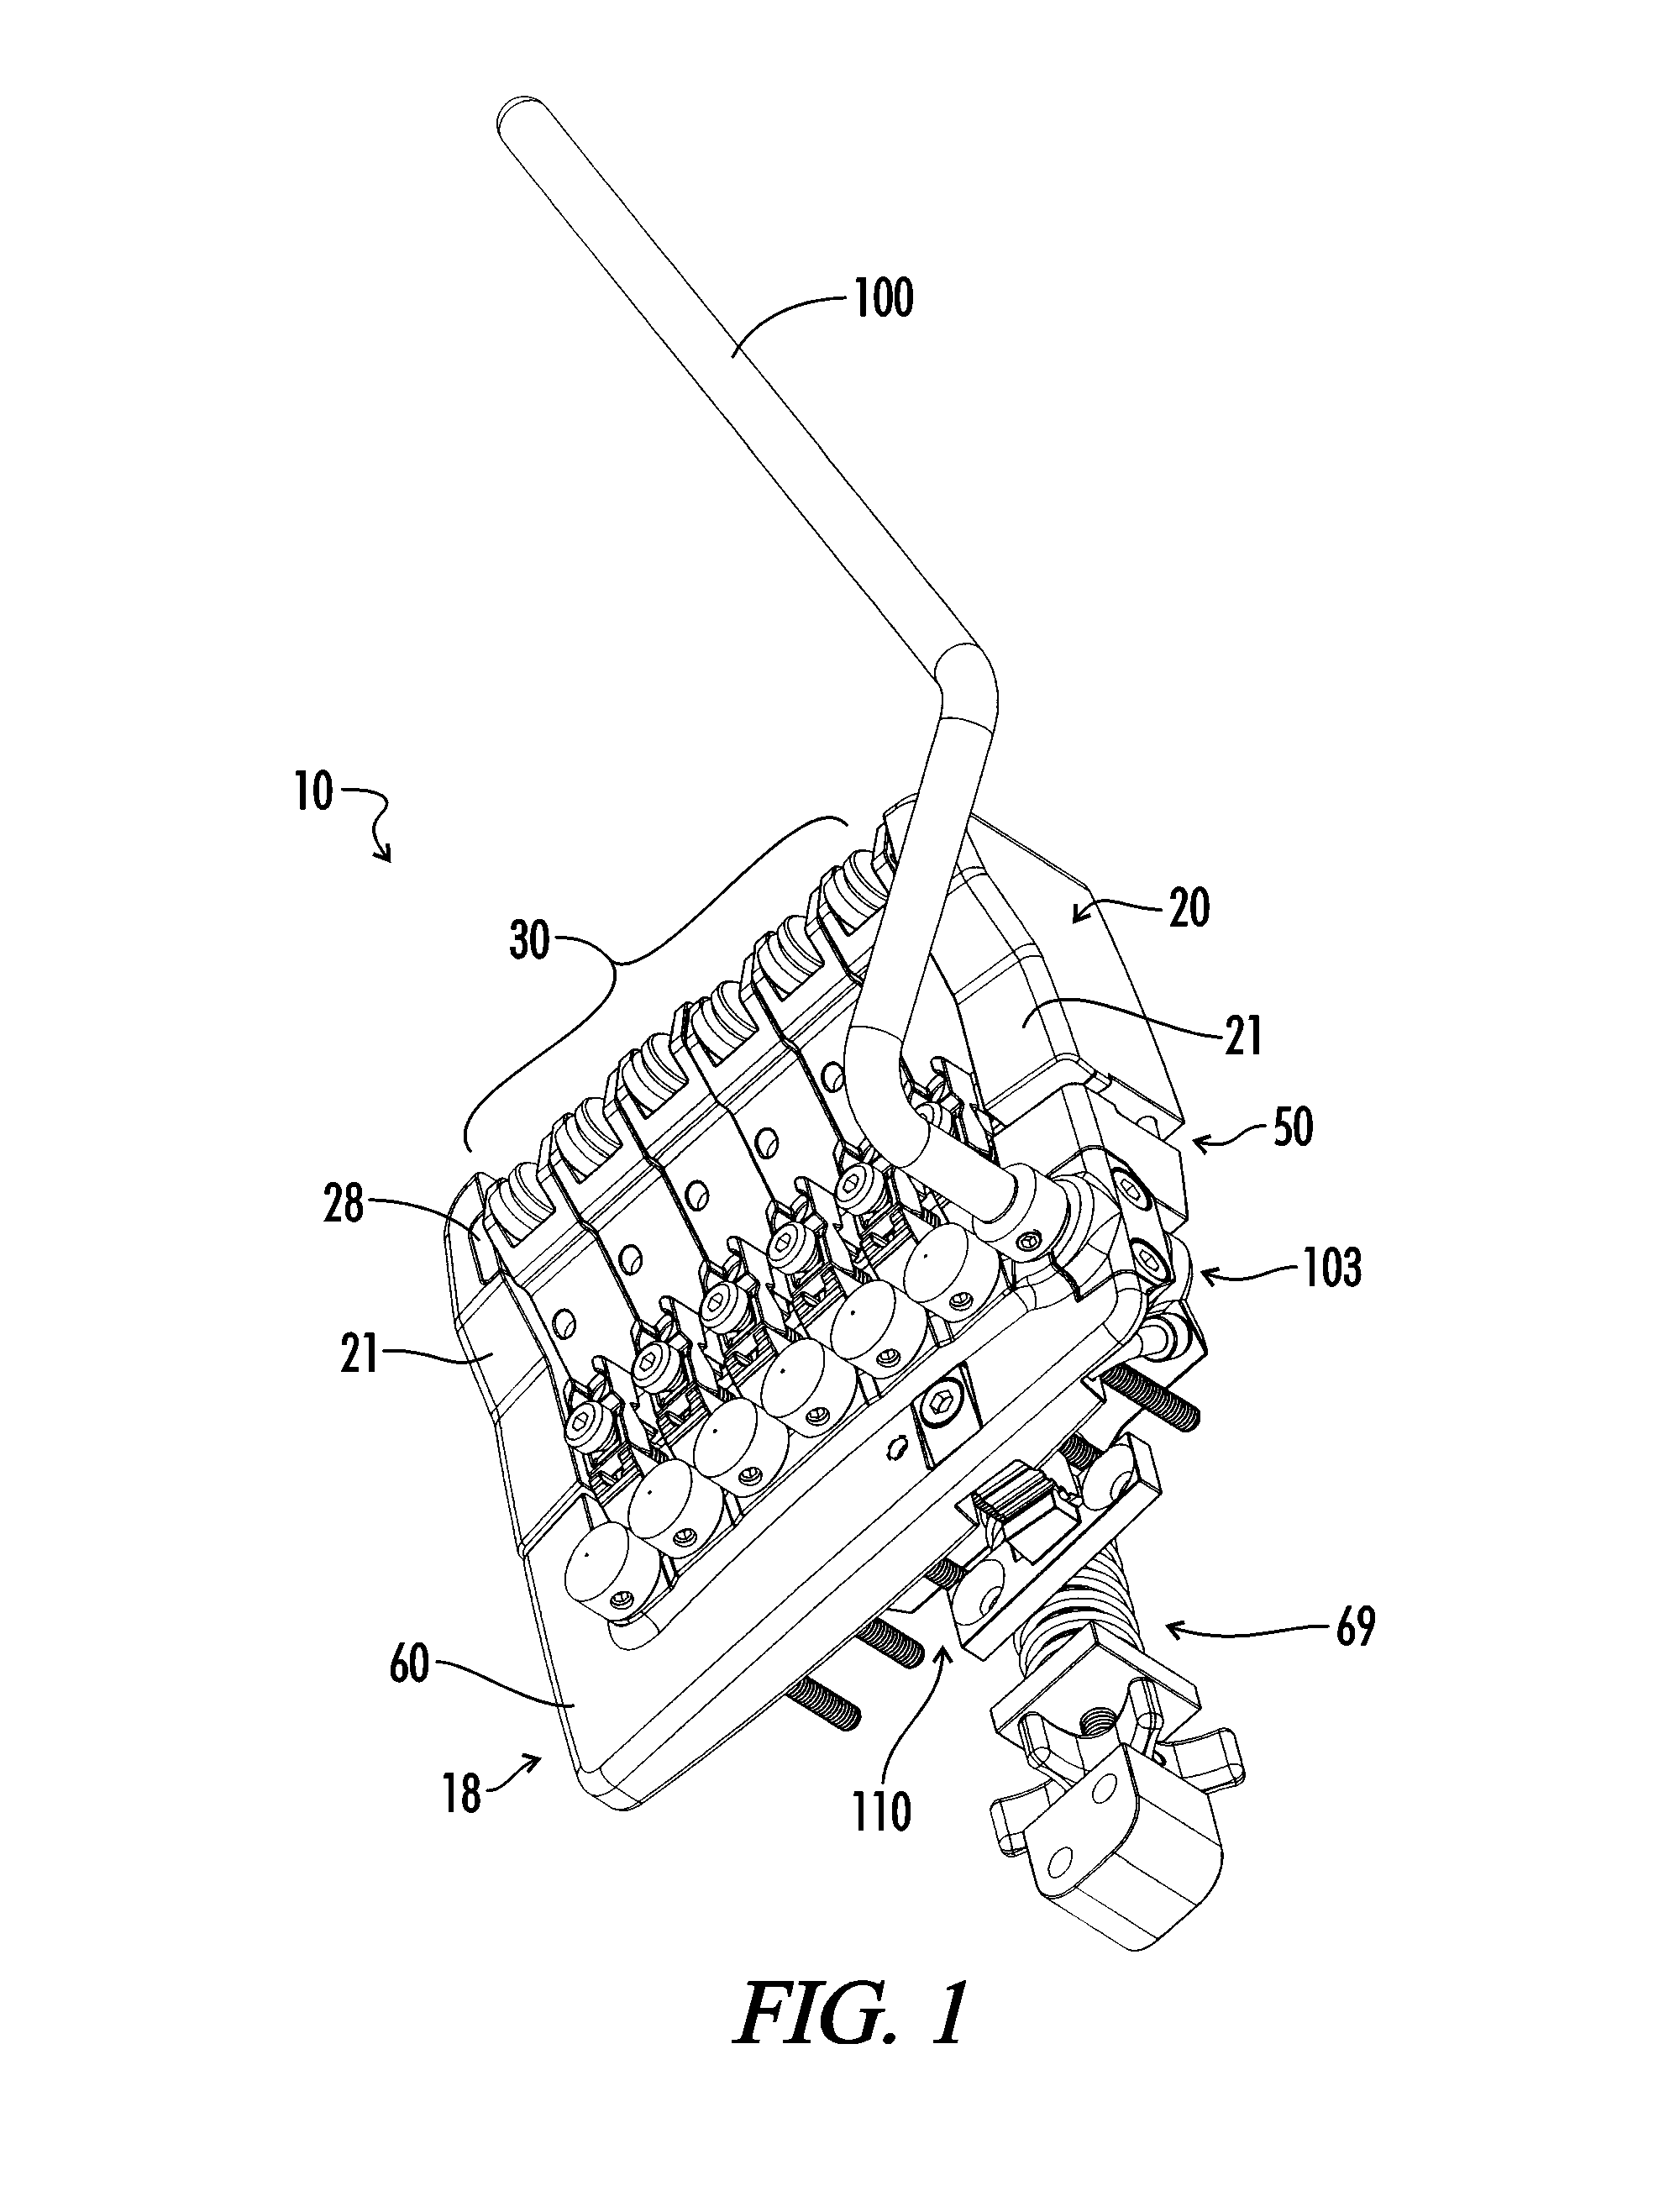 Tremolo Mechanism For A Stringed Musical Instrument With Cam Actuated Lock